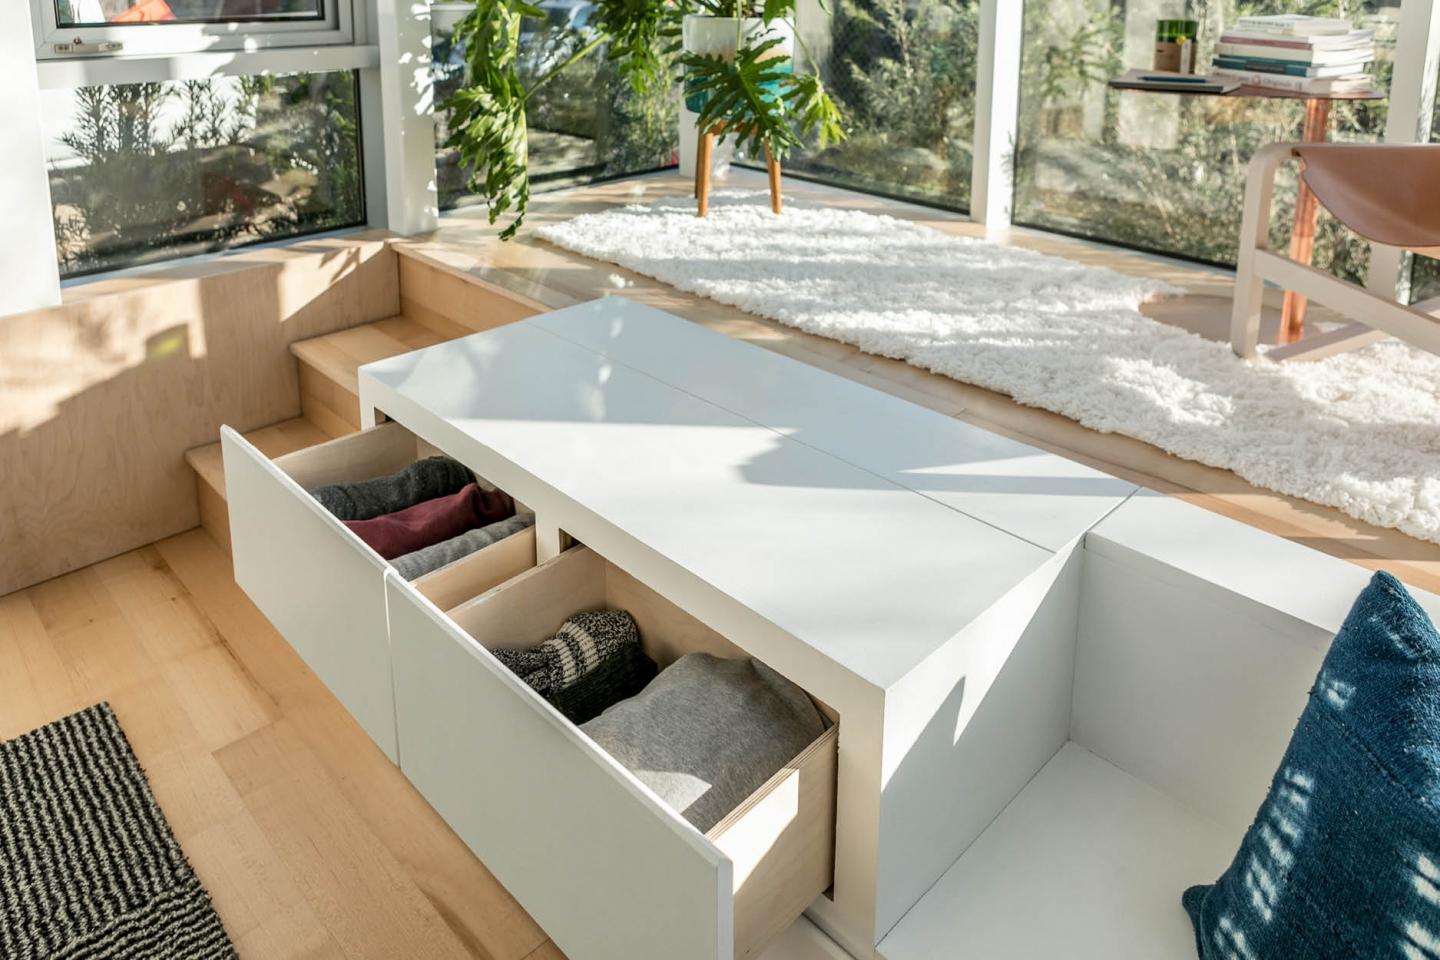 Surprising storage units are seamlessly embedded throughout the space can this particular design can double as a platform to read or enjoy a sip of coffee